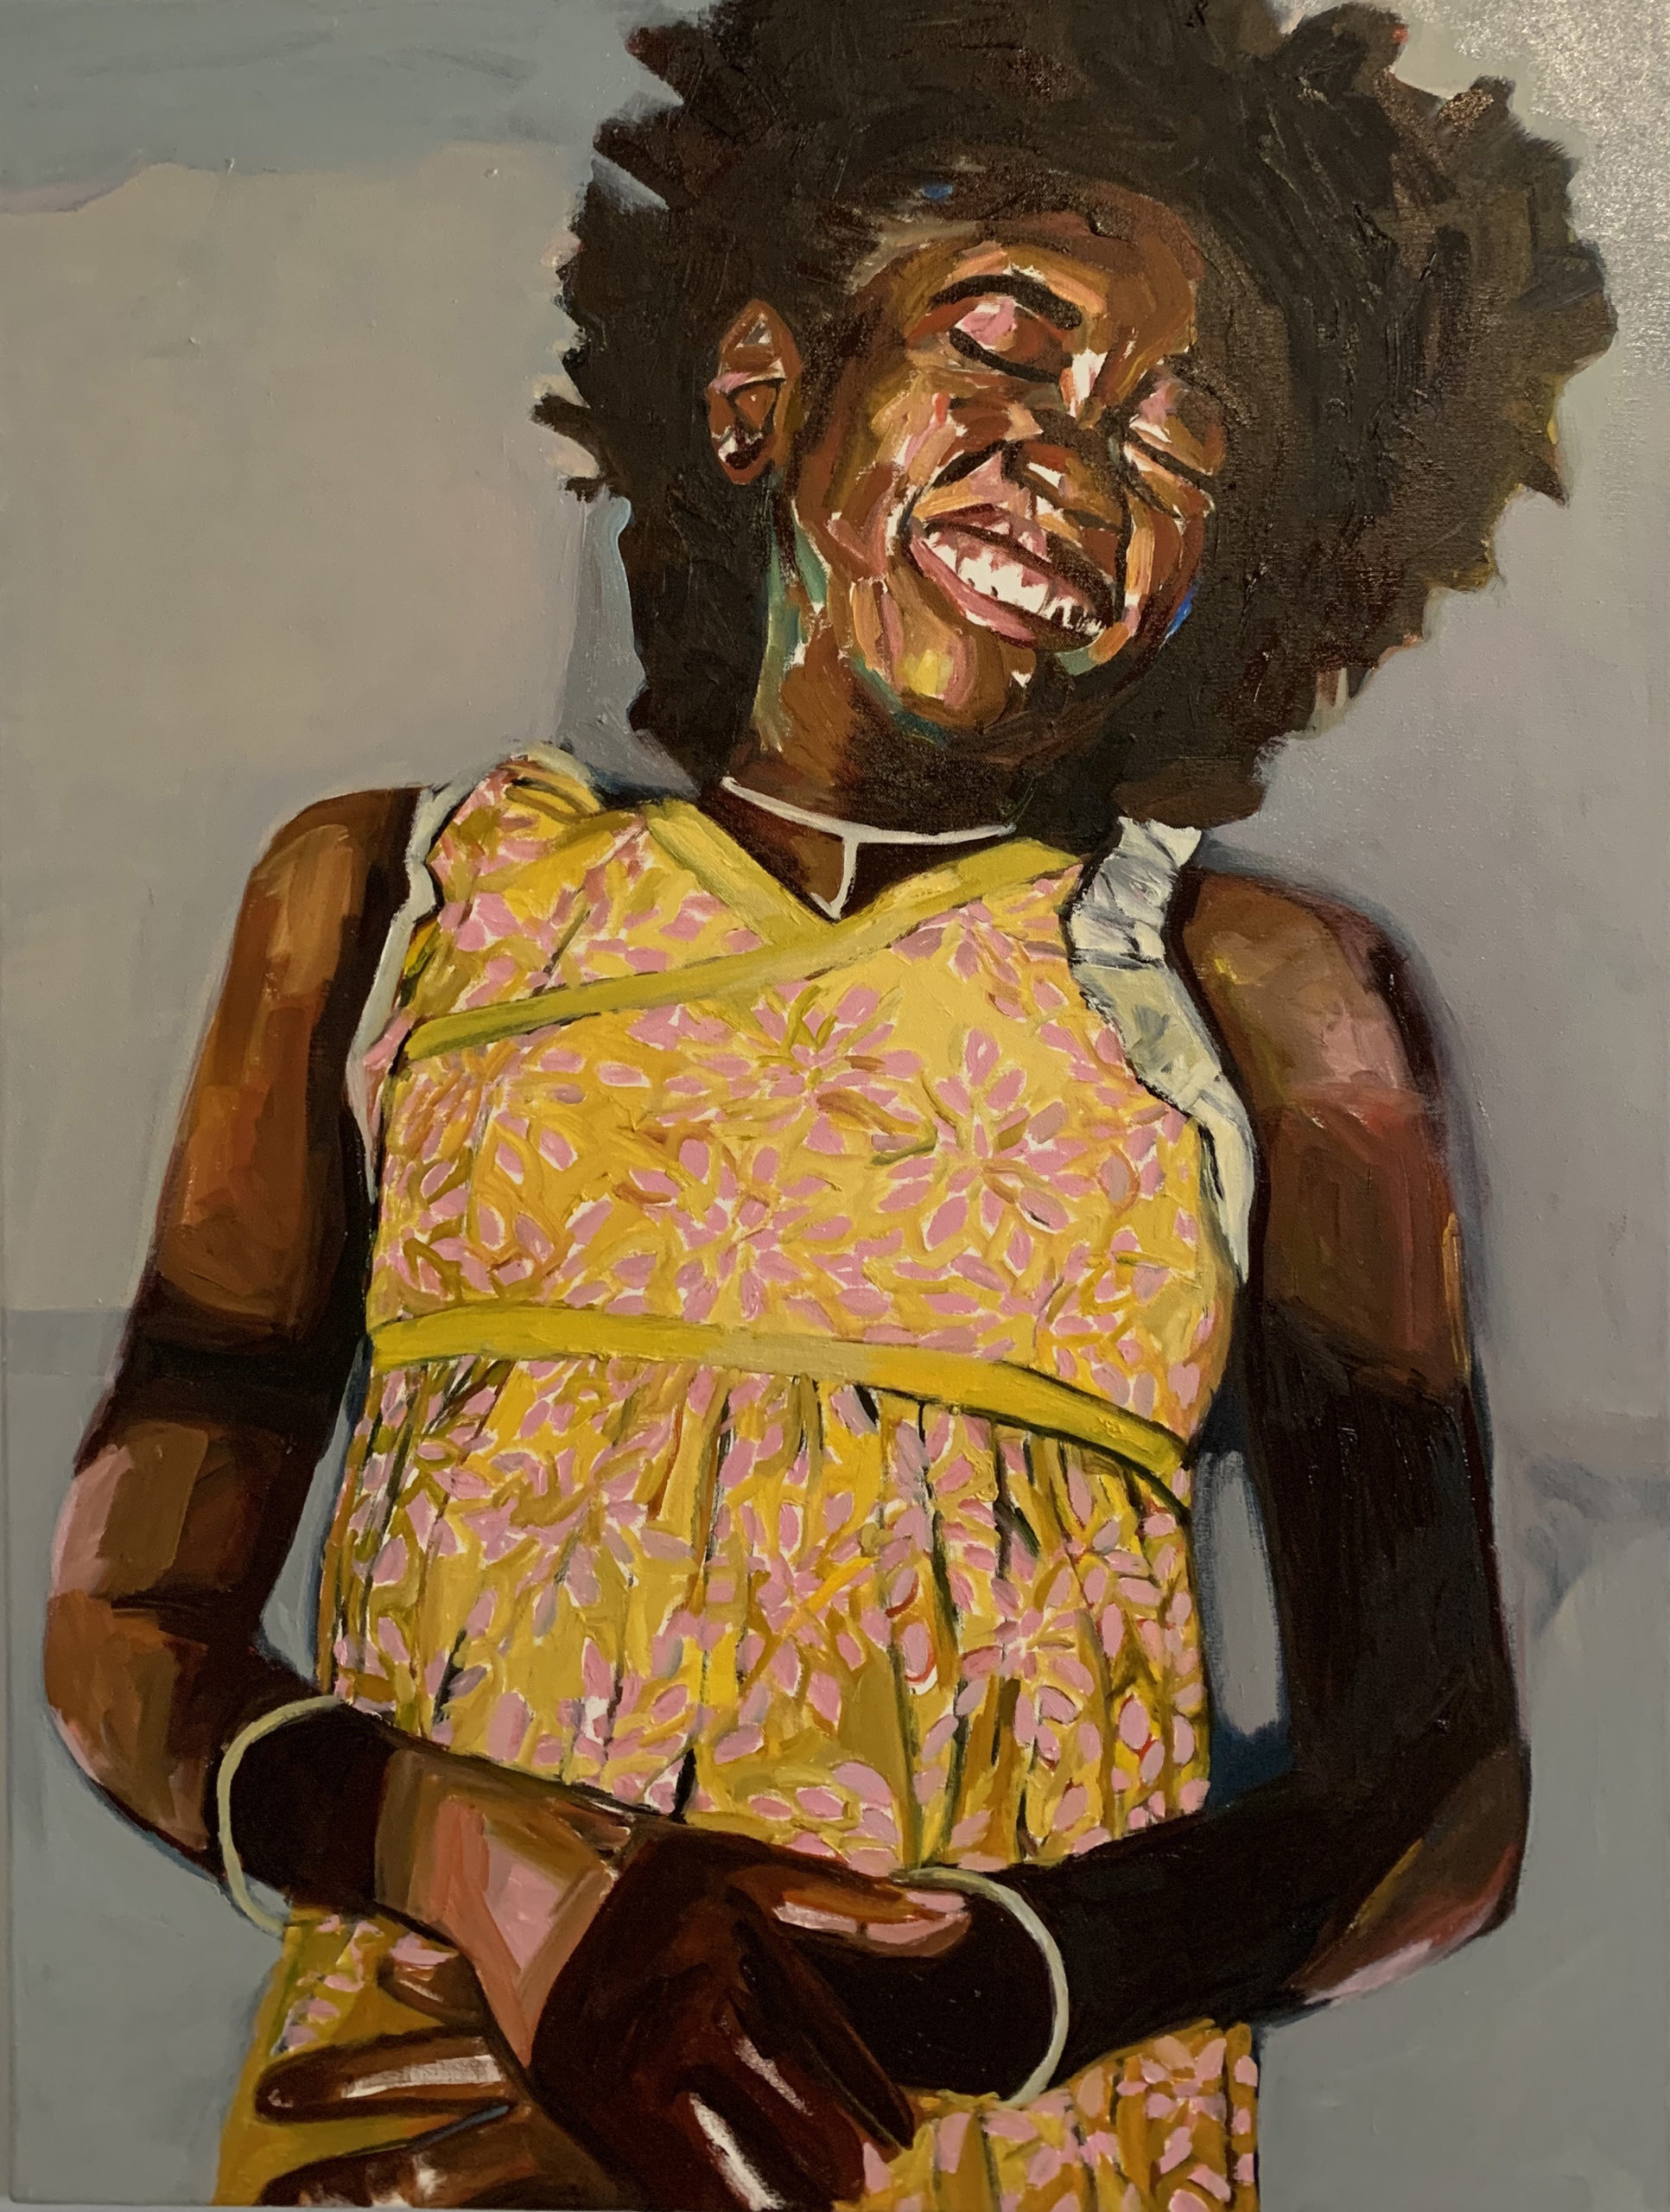 Eloise Laughing by Beverly McIver, oil on canvas, 40 x 30   30,000